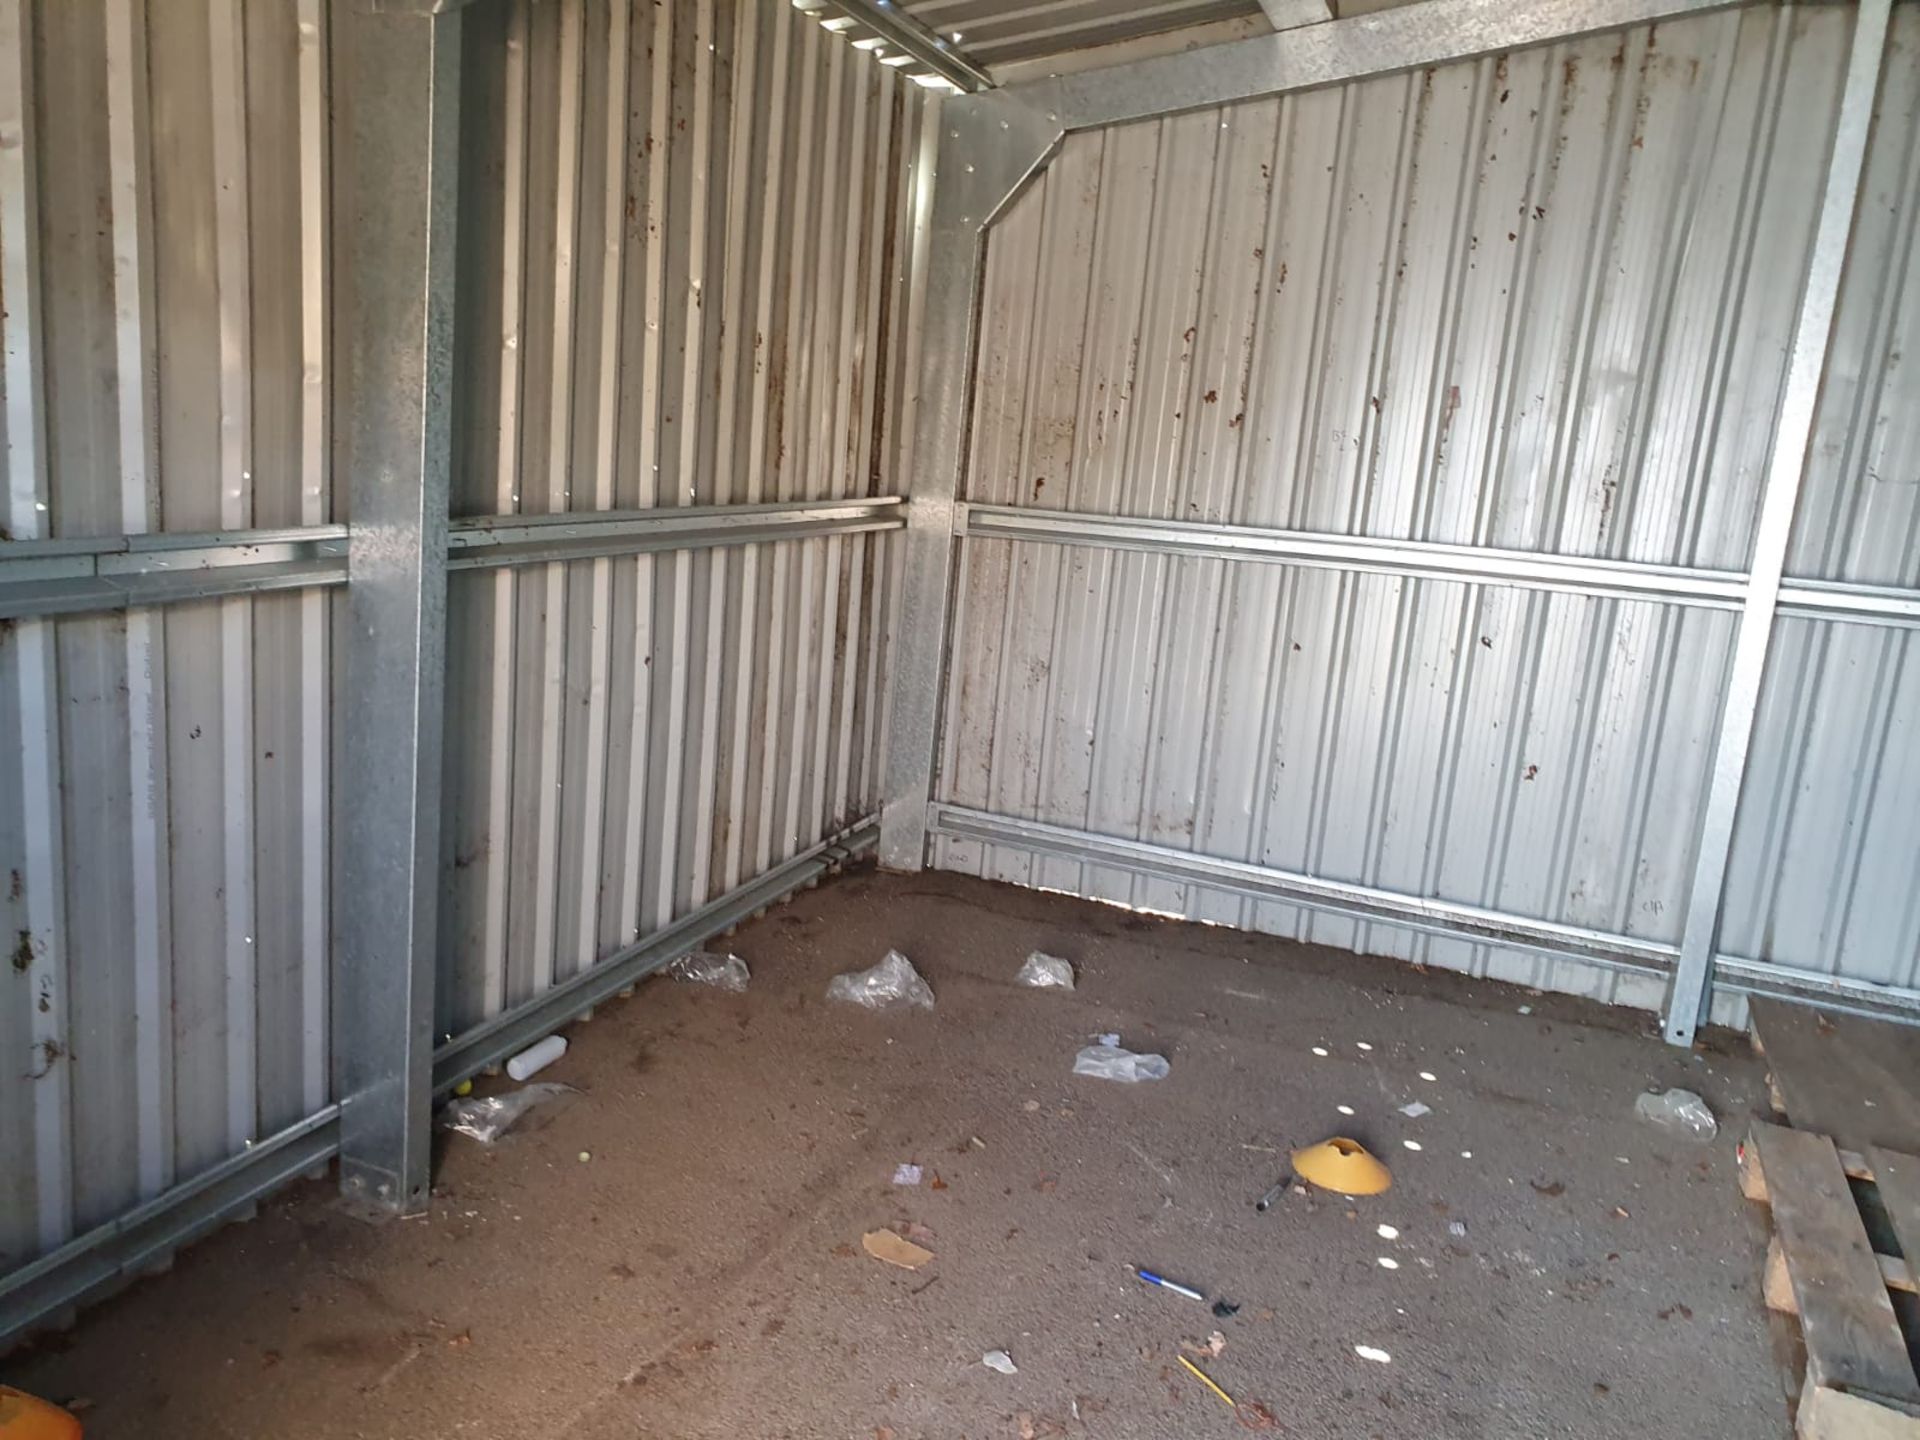 1 x Large Steel Storage Shed Container With Four Wooden Folding Doors - Approx Dimensions 5M x 5M - Image 5 of 18